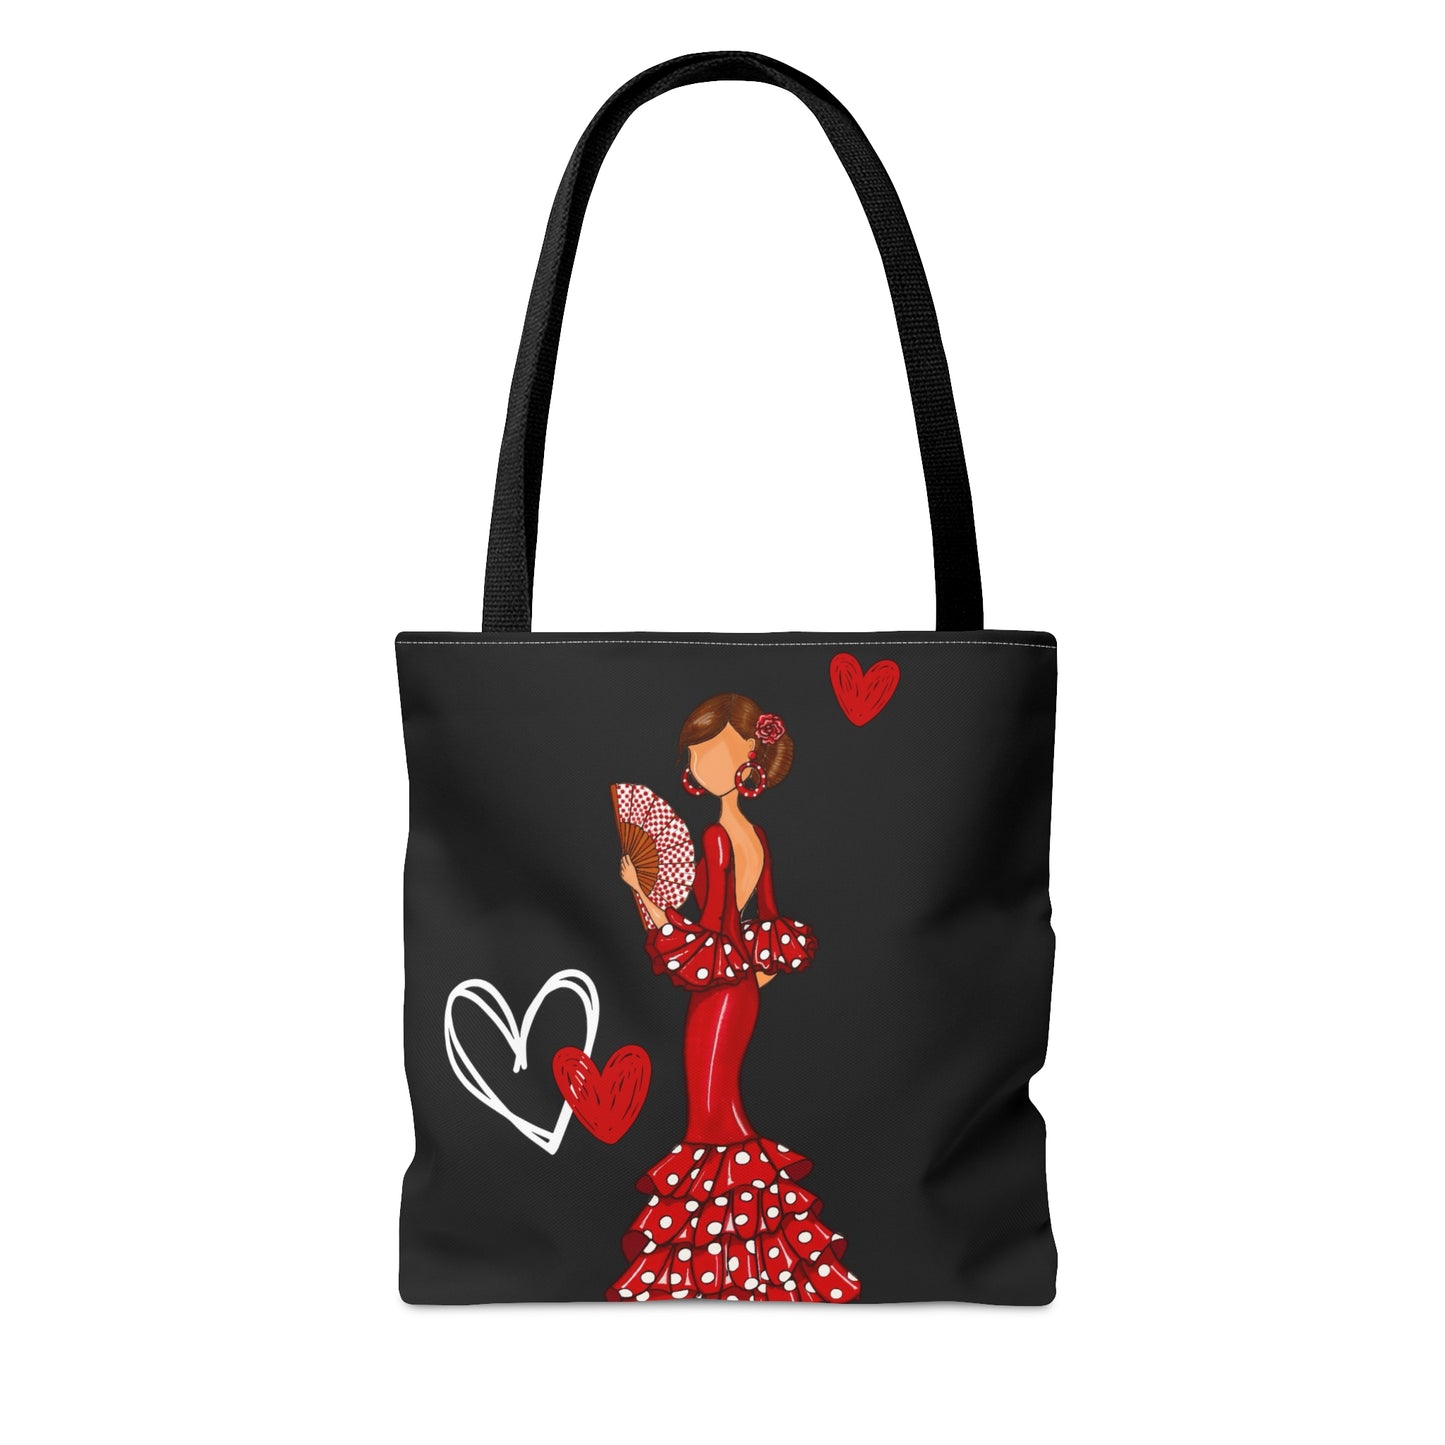 a tote bag with a woman in a red dress holding a fan